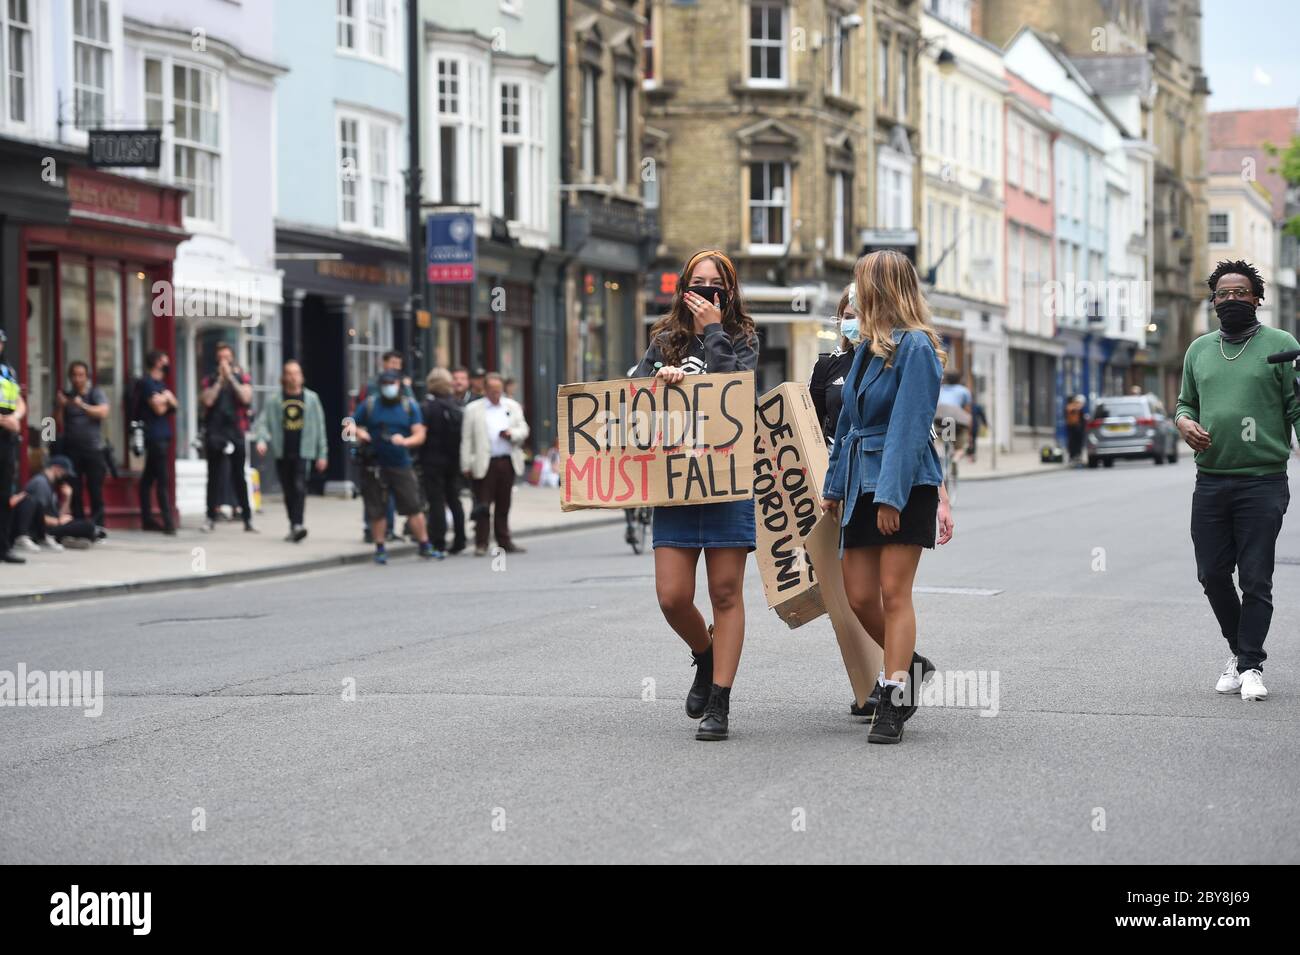 Protesters in Oxford High Street, Oxford, during a protest calling for the removal of the statue of 19th century imperialist, politician Cecil Rhodes from the Oriel college, Oxford, which has reignited amid anti-racism demonstrations. Stock Photo